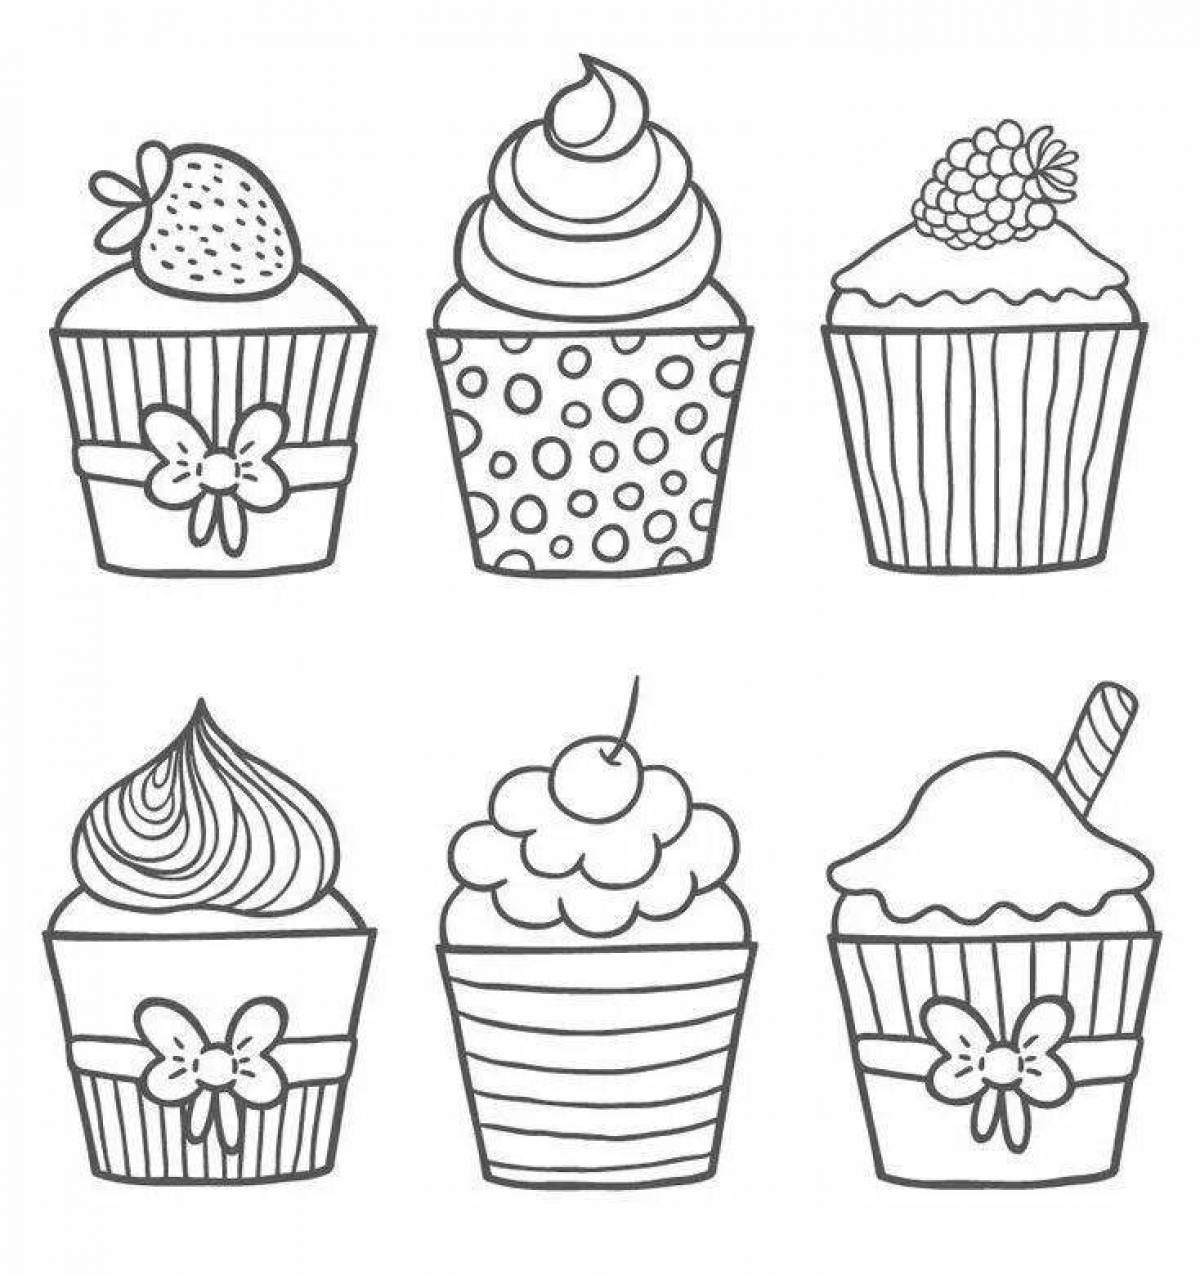 Cupcake coloring page for kids